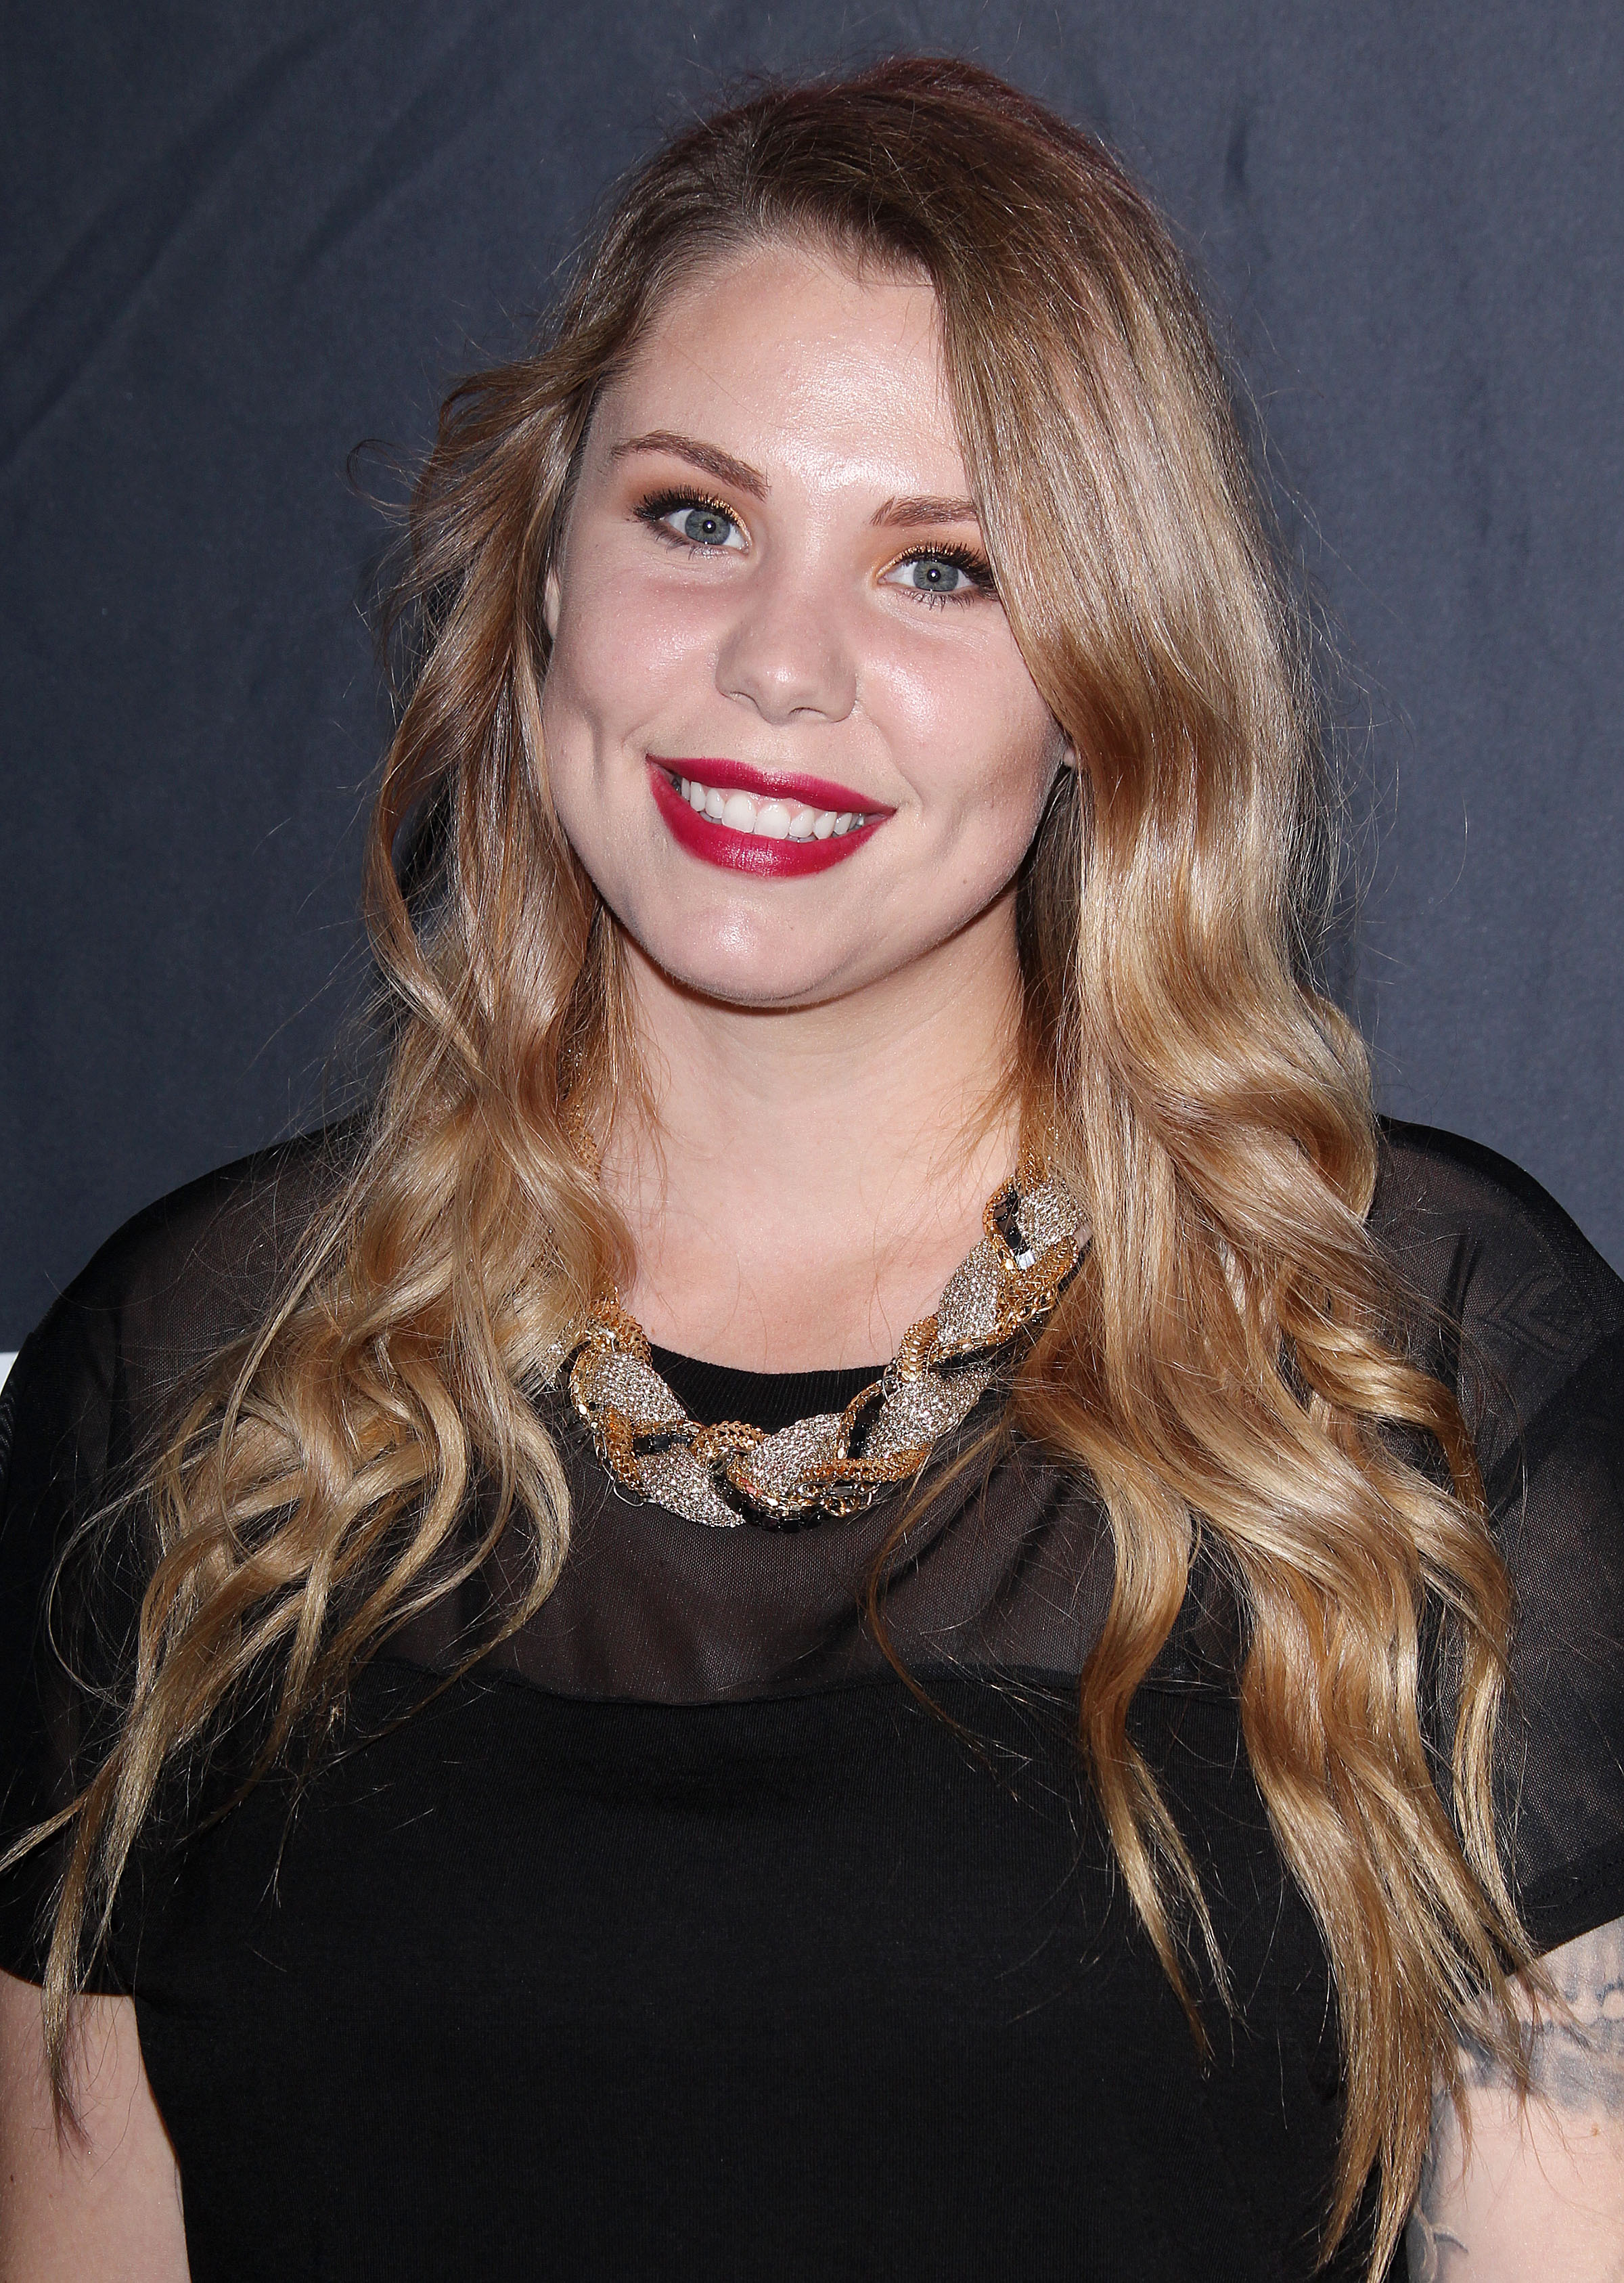 Kailyn Lowry Welcomes Third Child